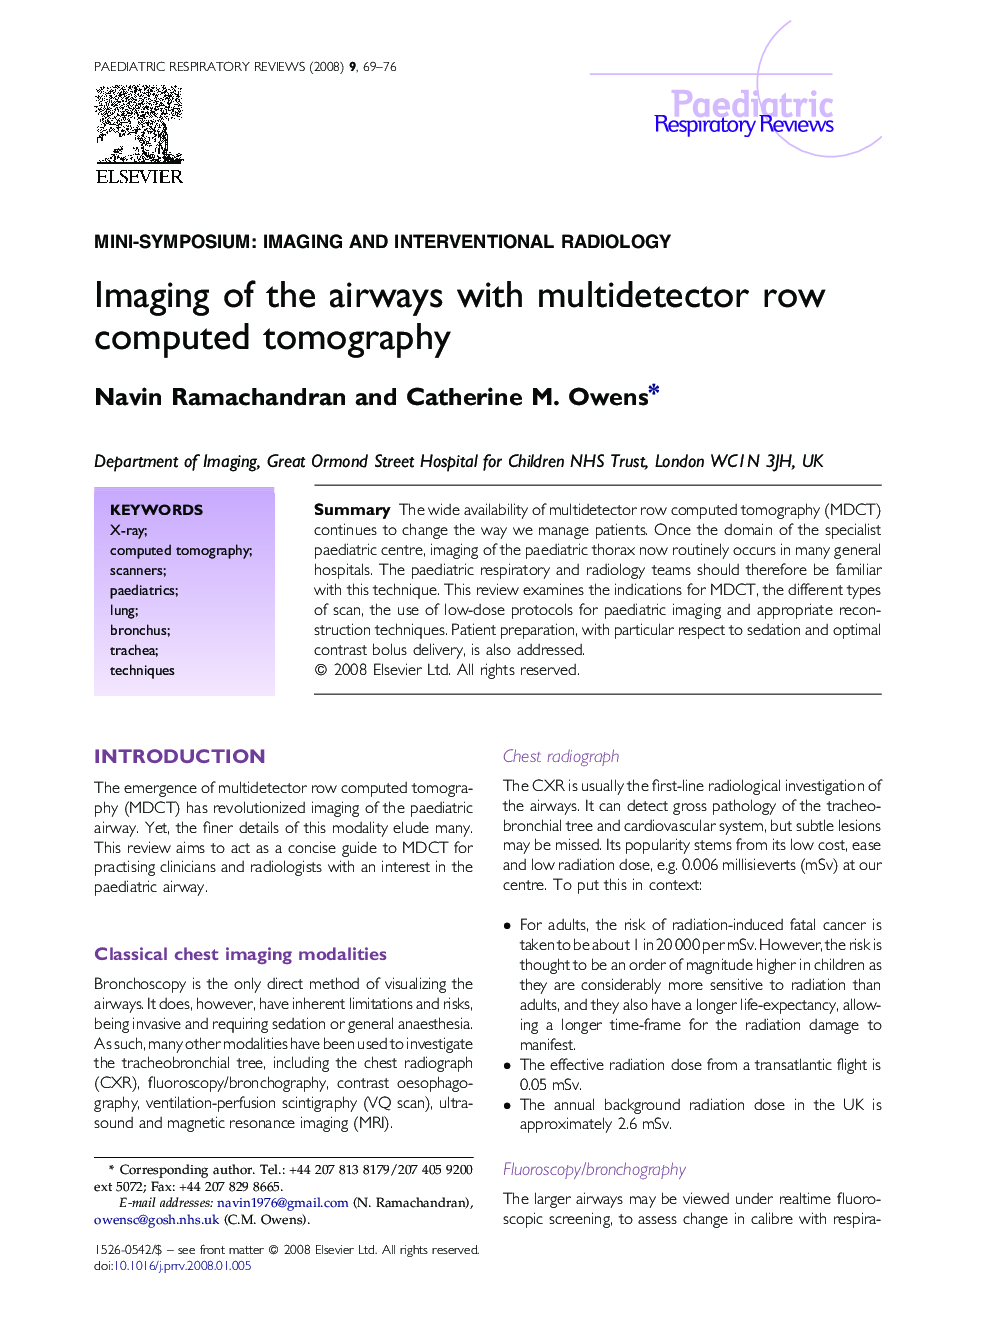 Imaging of the airways with multidetector row computed tomography